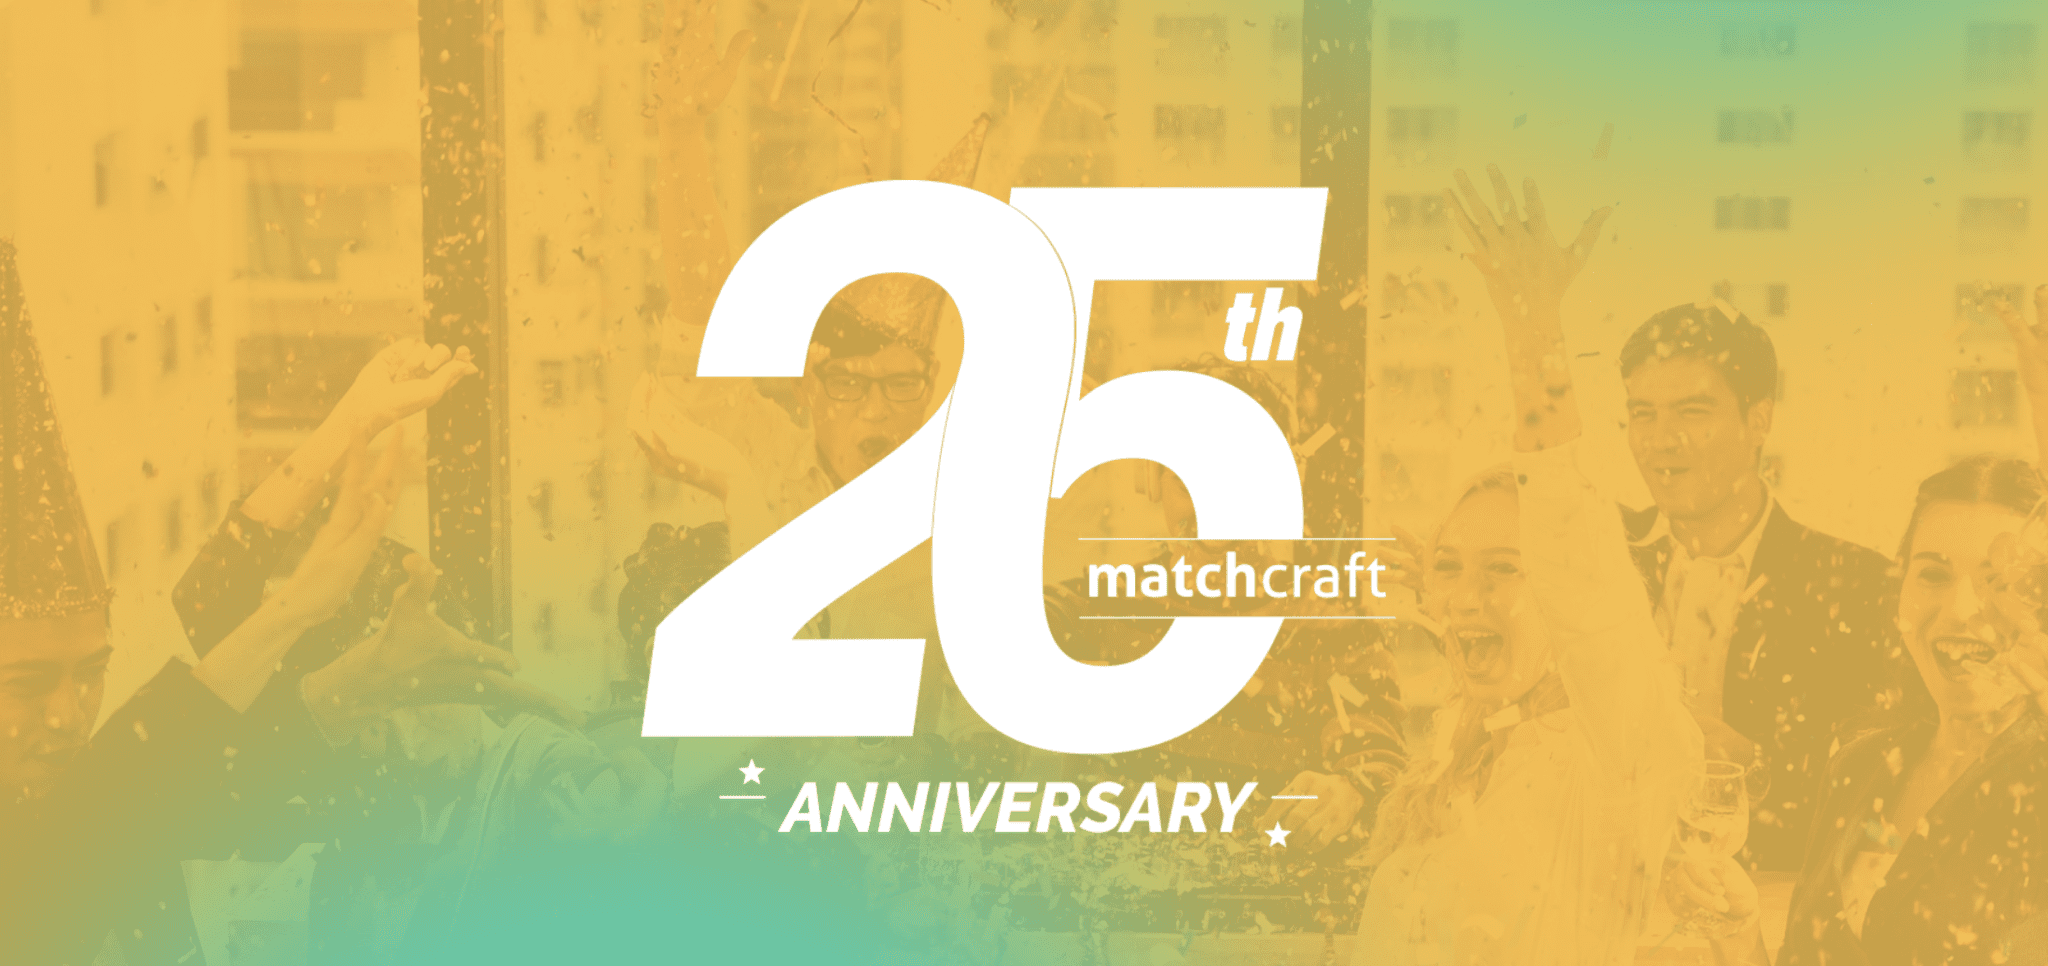 MatchCraft, a Pioneer in PPC Machine Learning, Is Turning 25